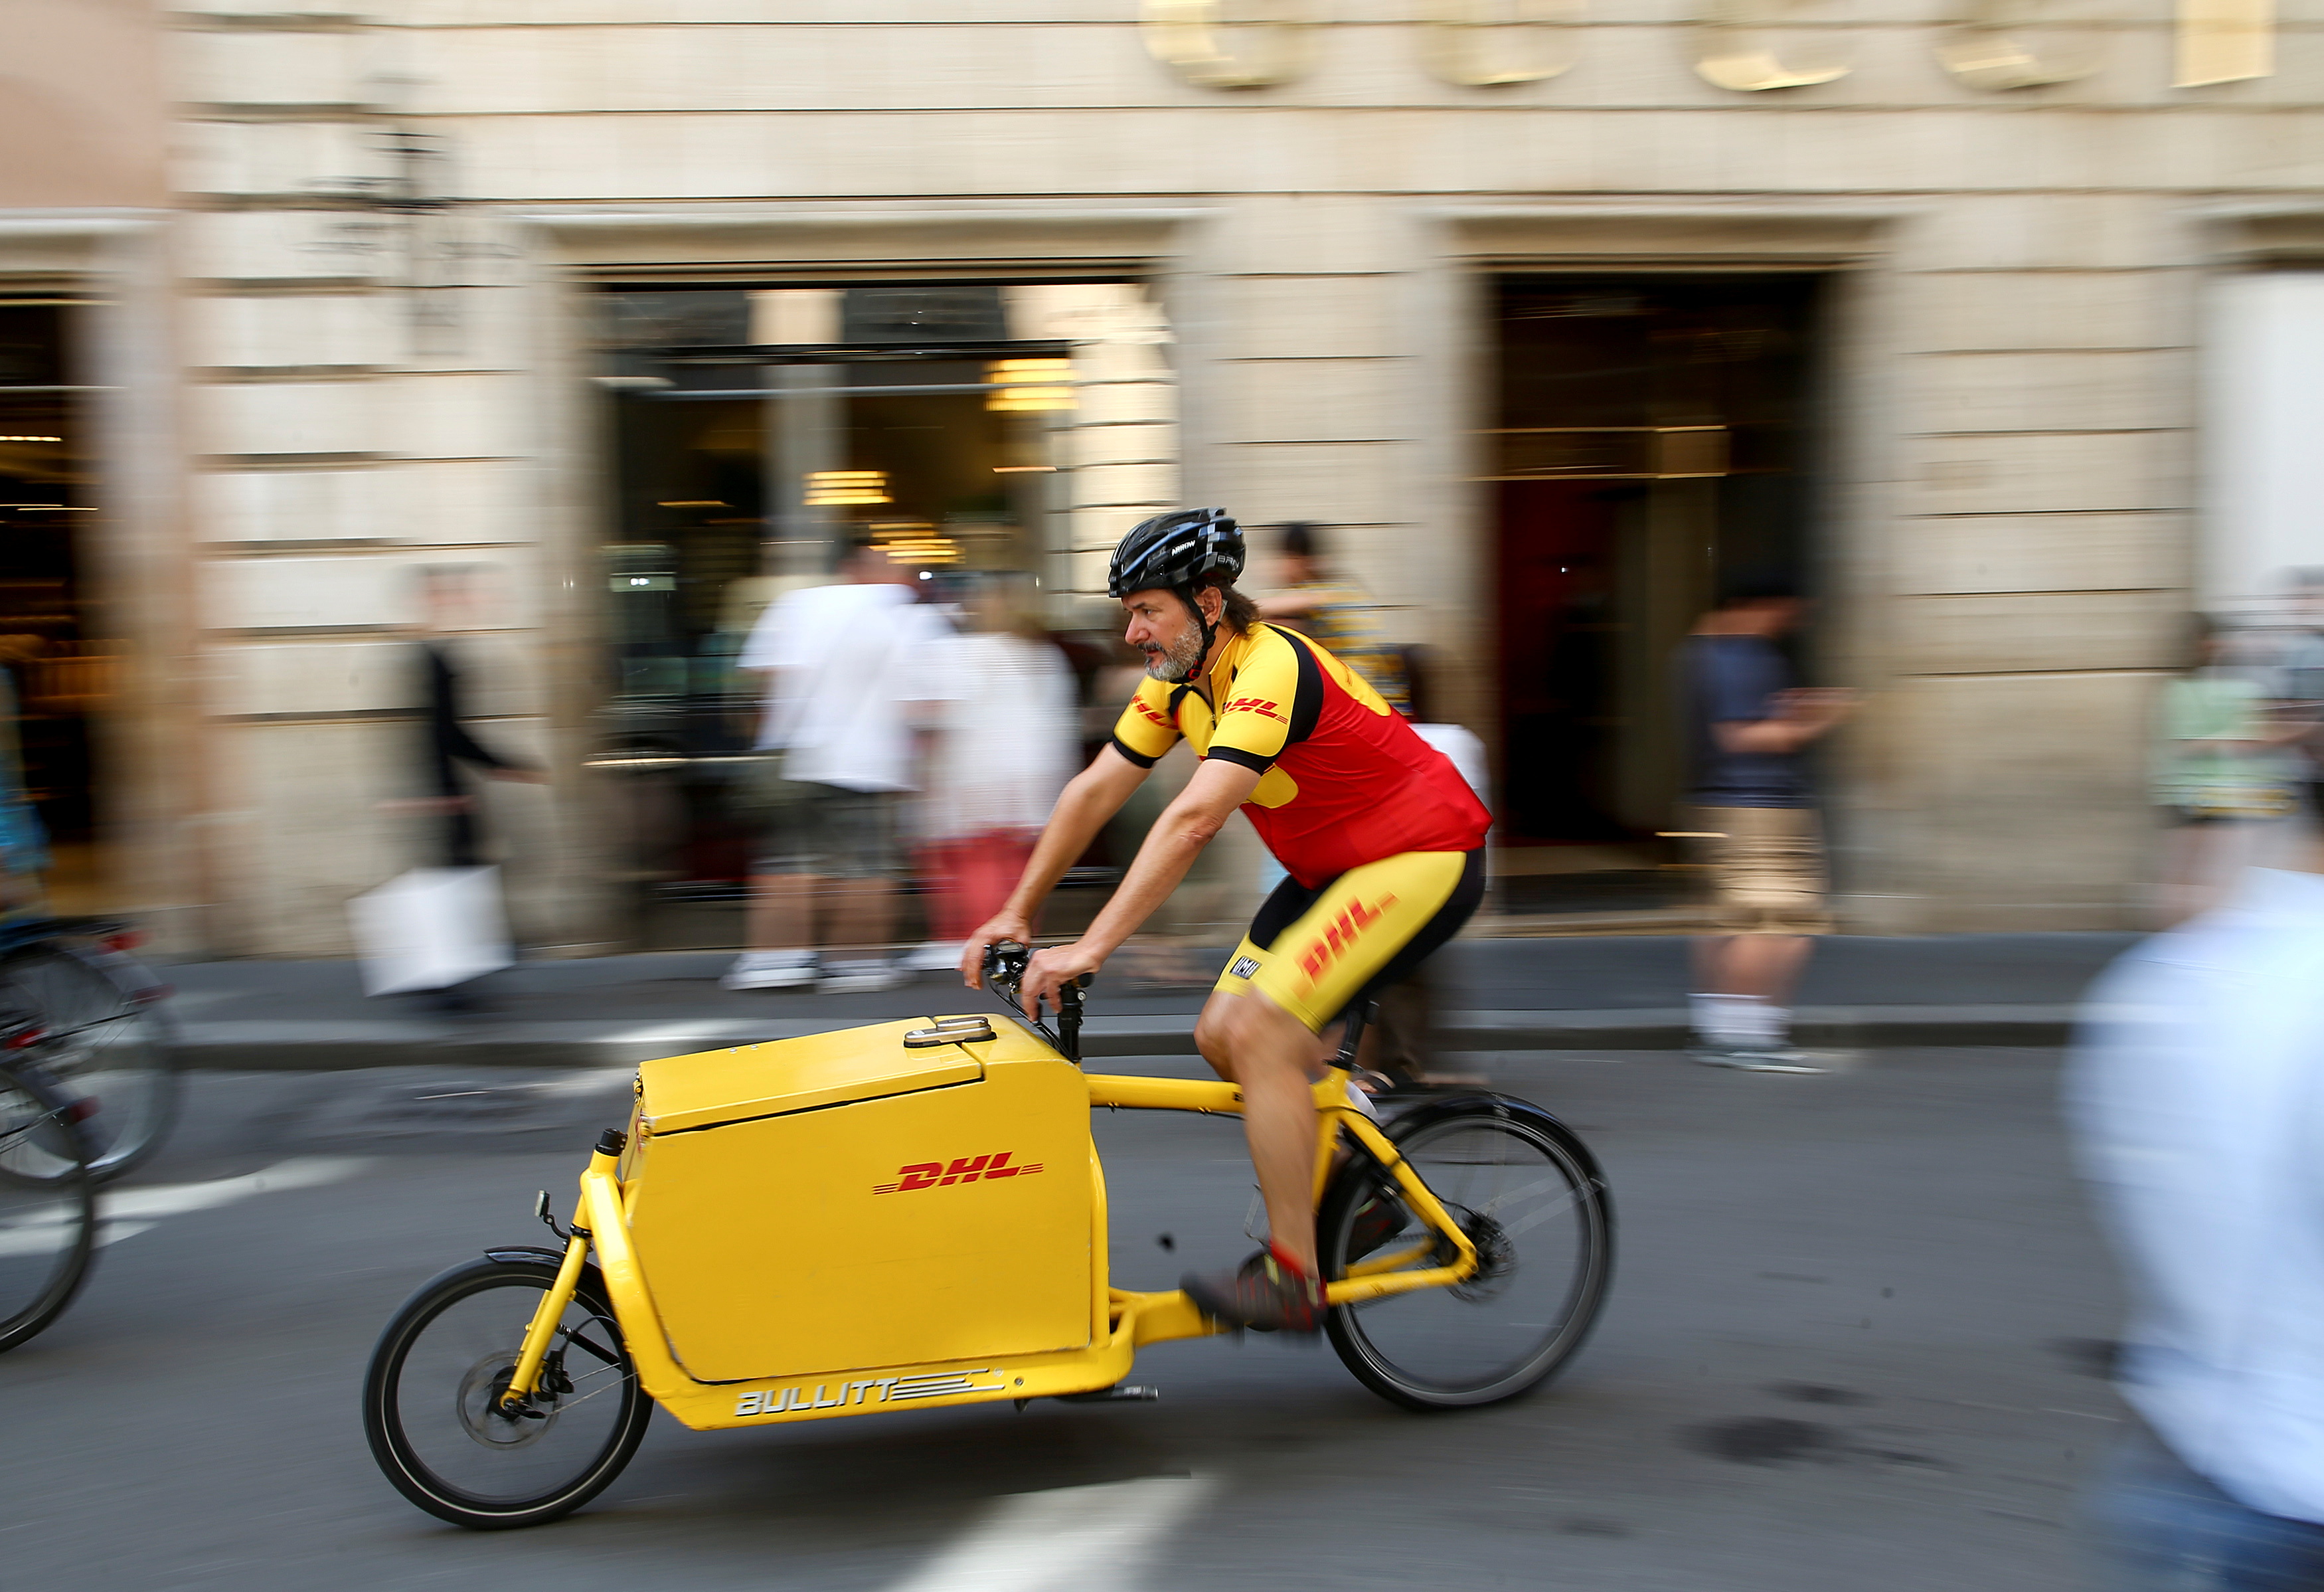 A DHL bike messenger rides in central Rome